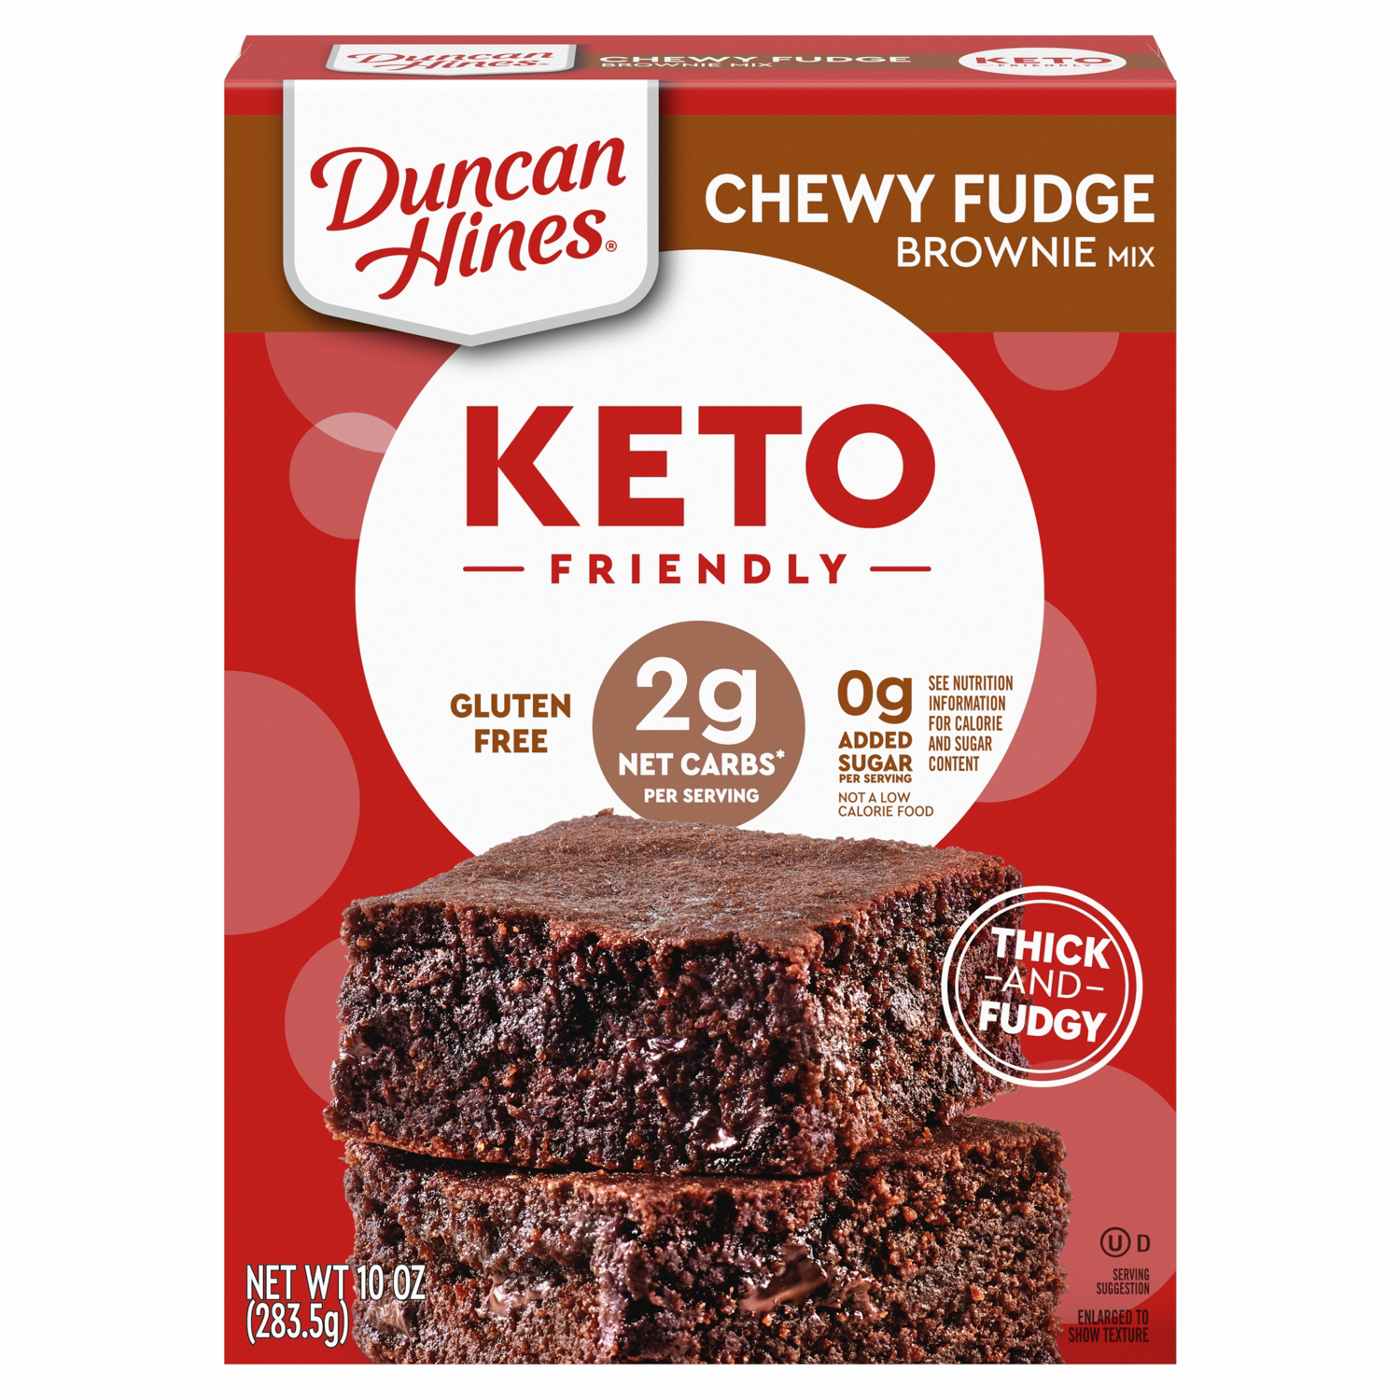 Duncan Hines Keto Friendly Gluten Free No Sugar Added Chewy Fudge Brownie Mix; image 1 of 7